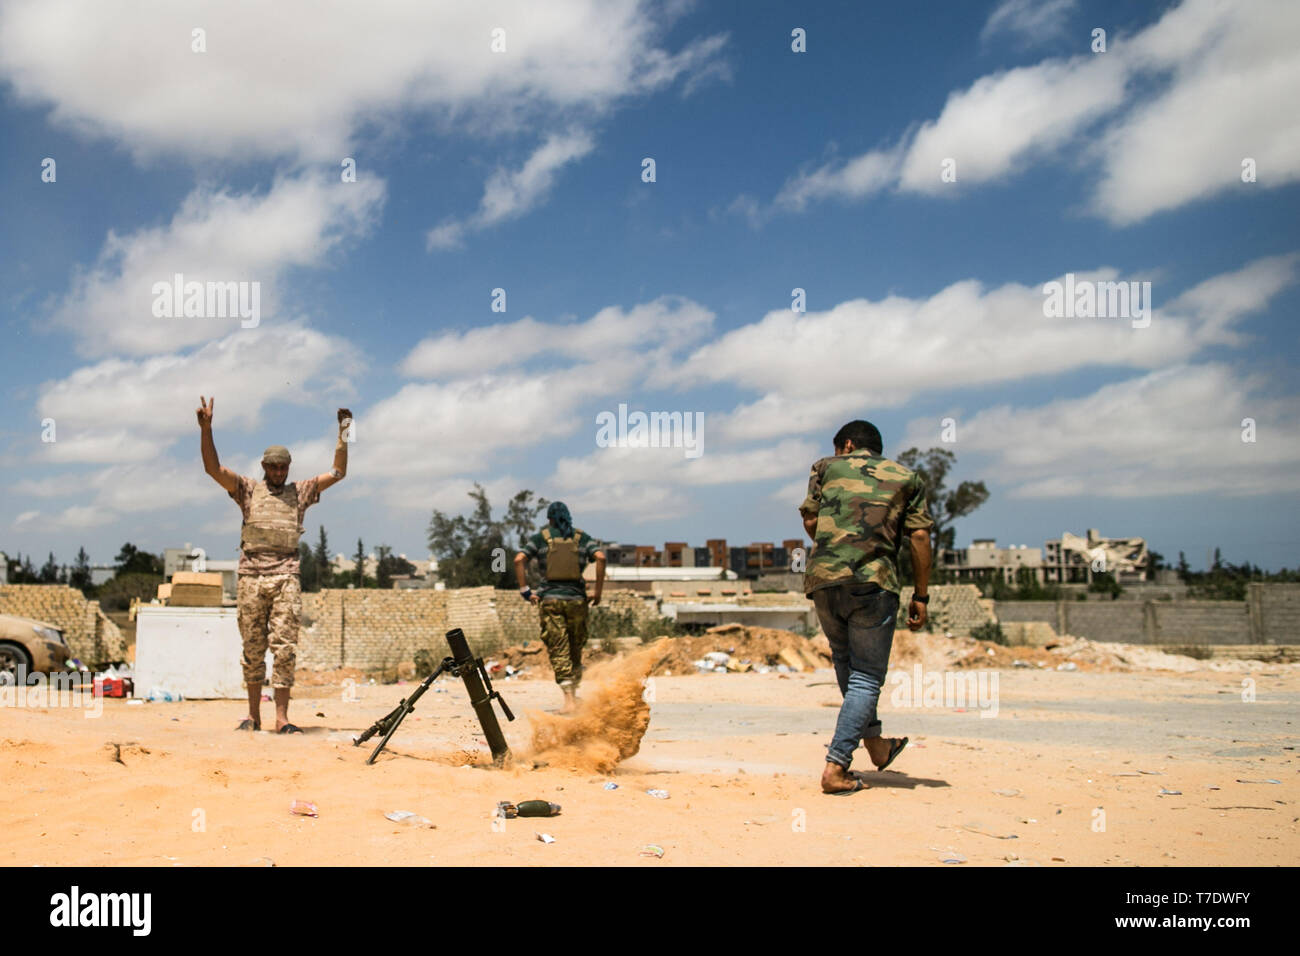 Tripoli, Libya. 6th May, 2019. Fighters from forces of the UN-backed Libyan government are seen during clashes in Salah Al-Din frontline, Tripoli, Libya, on May 6, 2019. A total of 432 people have been killed and 2,069 others injured in the fighting between the UN-backed Libyan government and the east-based army in and around the capital Tripoli, the World Health Organization (WHO) said Monday. Credit: Amru Salahuddien/Xinhua/Alamy Live News Stock Photo